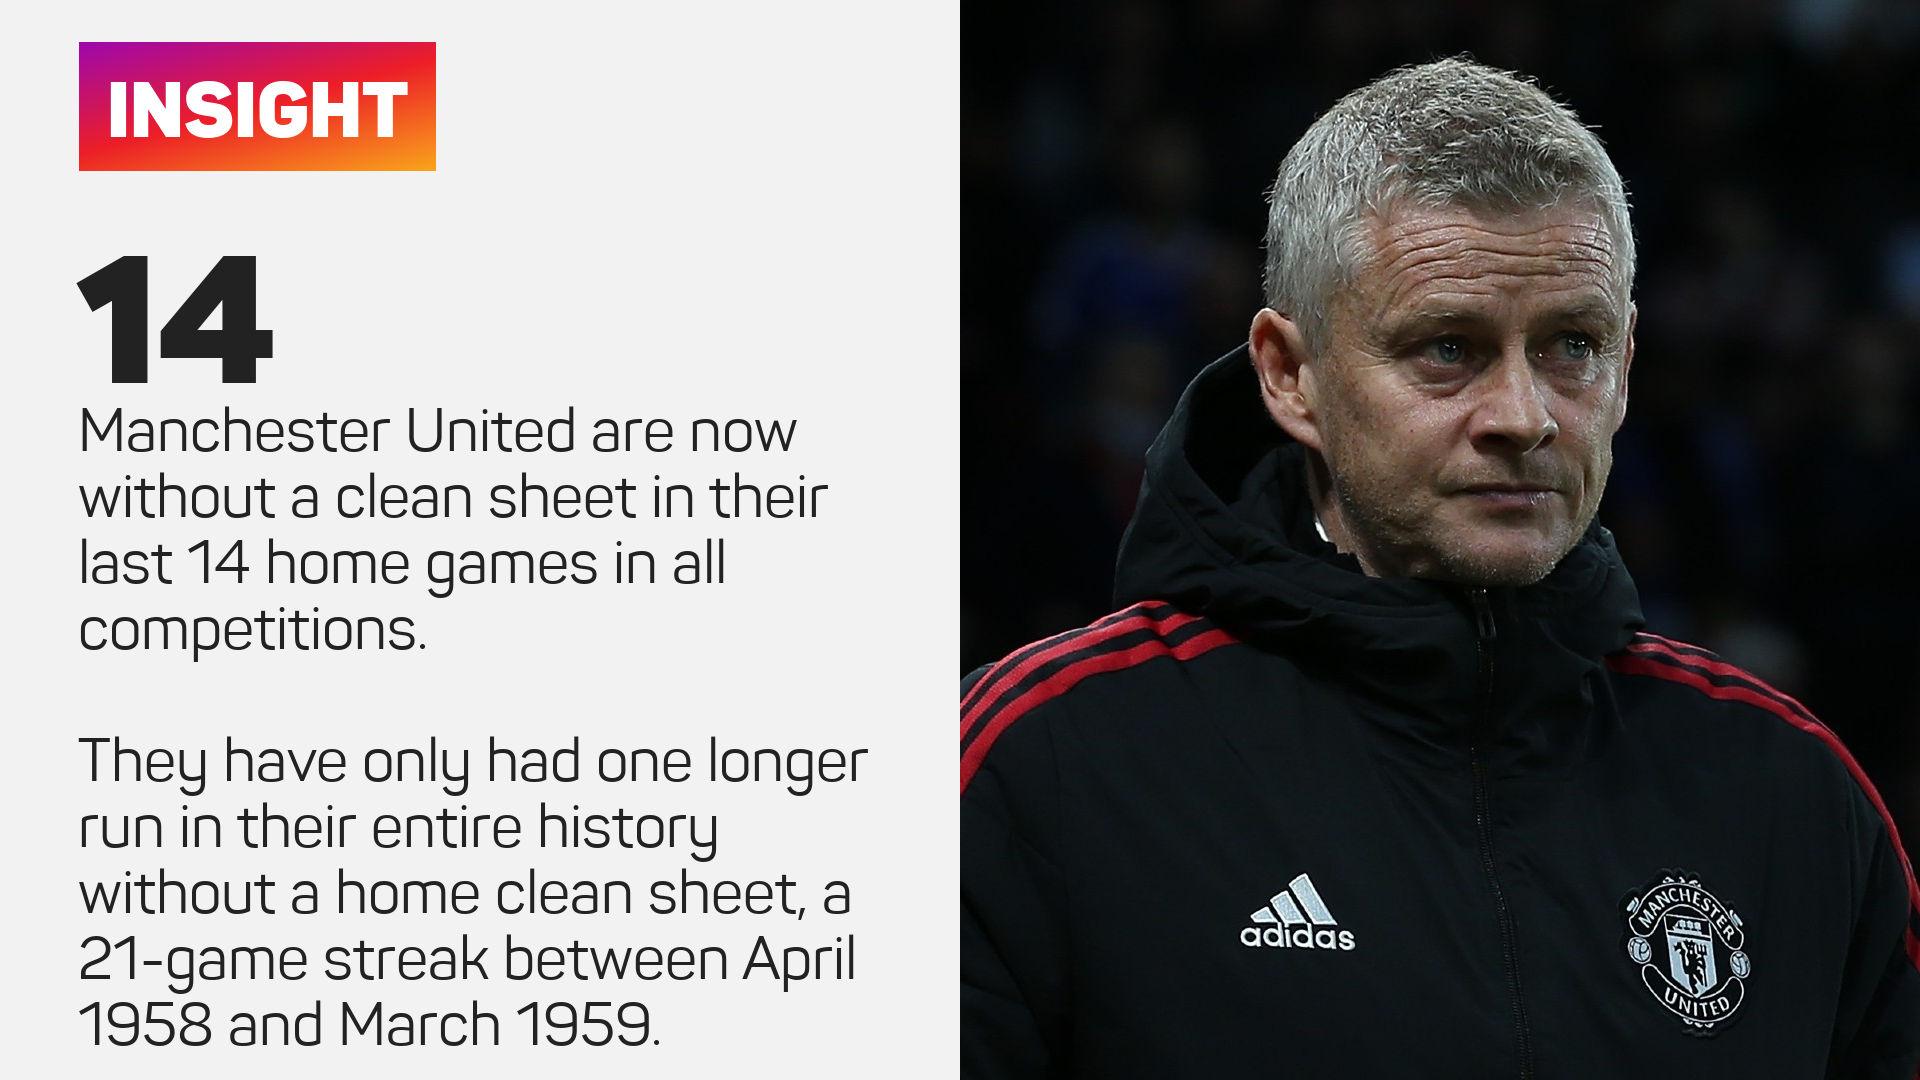 Manchester United are without a home clean sheet in 14 matches